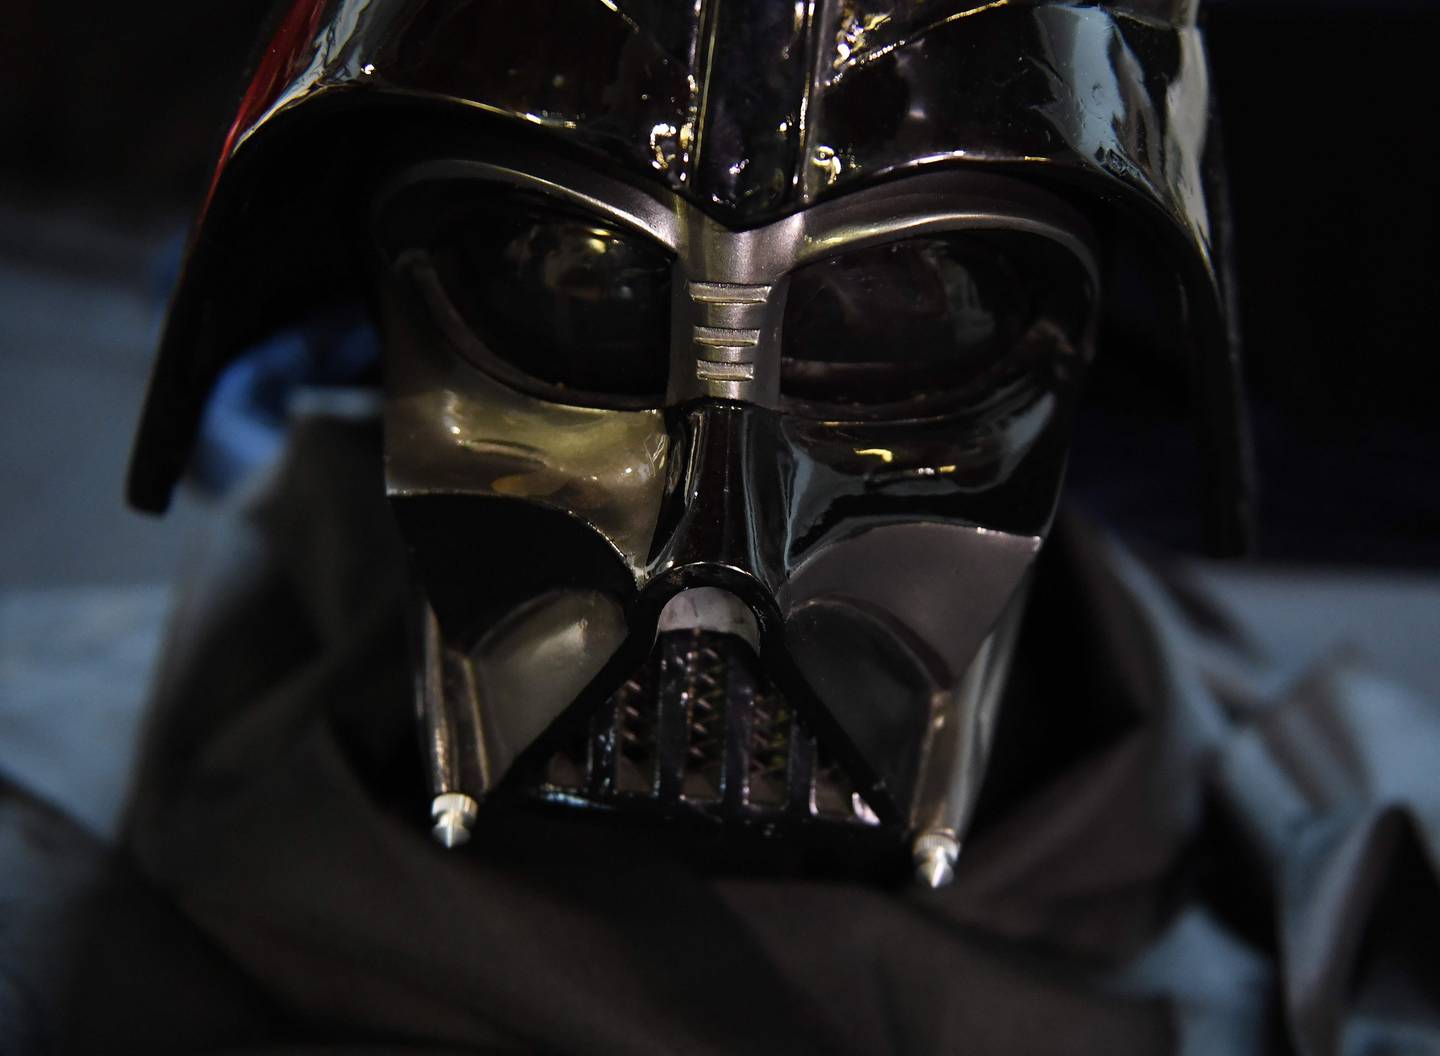 A Star Wars: Episode VI - Return of the Jedi movie "Darth Vader" helmet valued between $40,000 to $60,000 that will be auctioned on December 13 at the Paley Center for Media, by the 'Profiles in History' auction house in Calabasas, California on December 6, 2018. (Photo by Mark RALSTON / AFP)